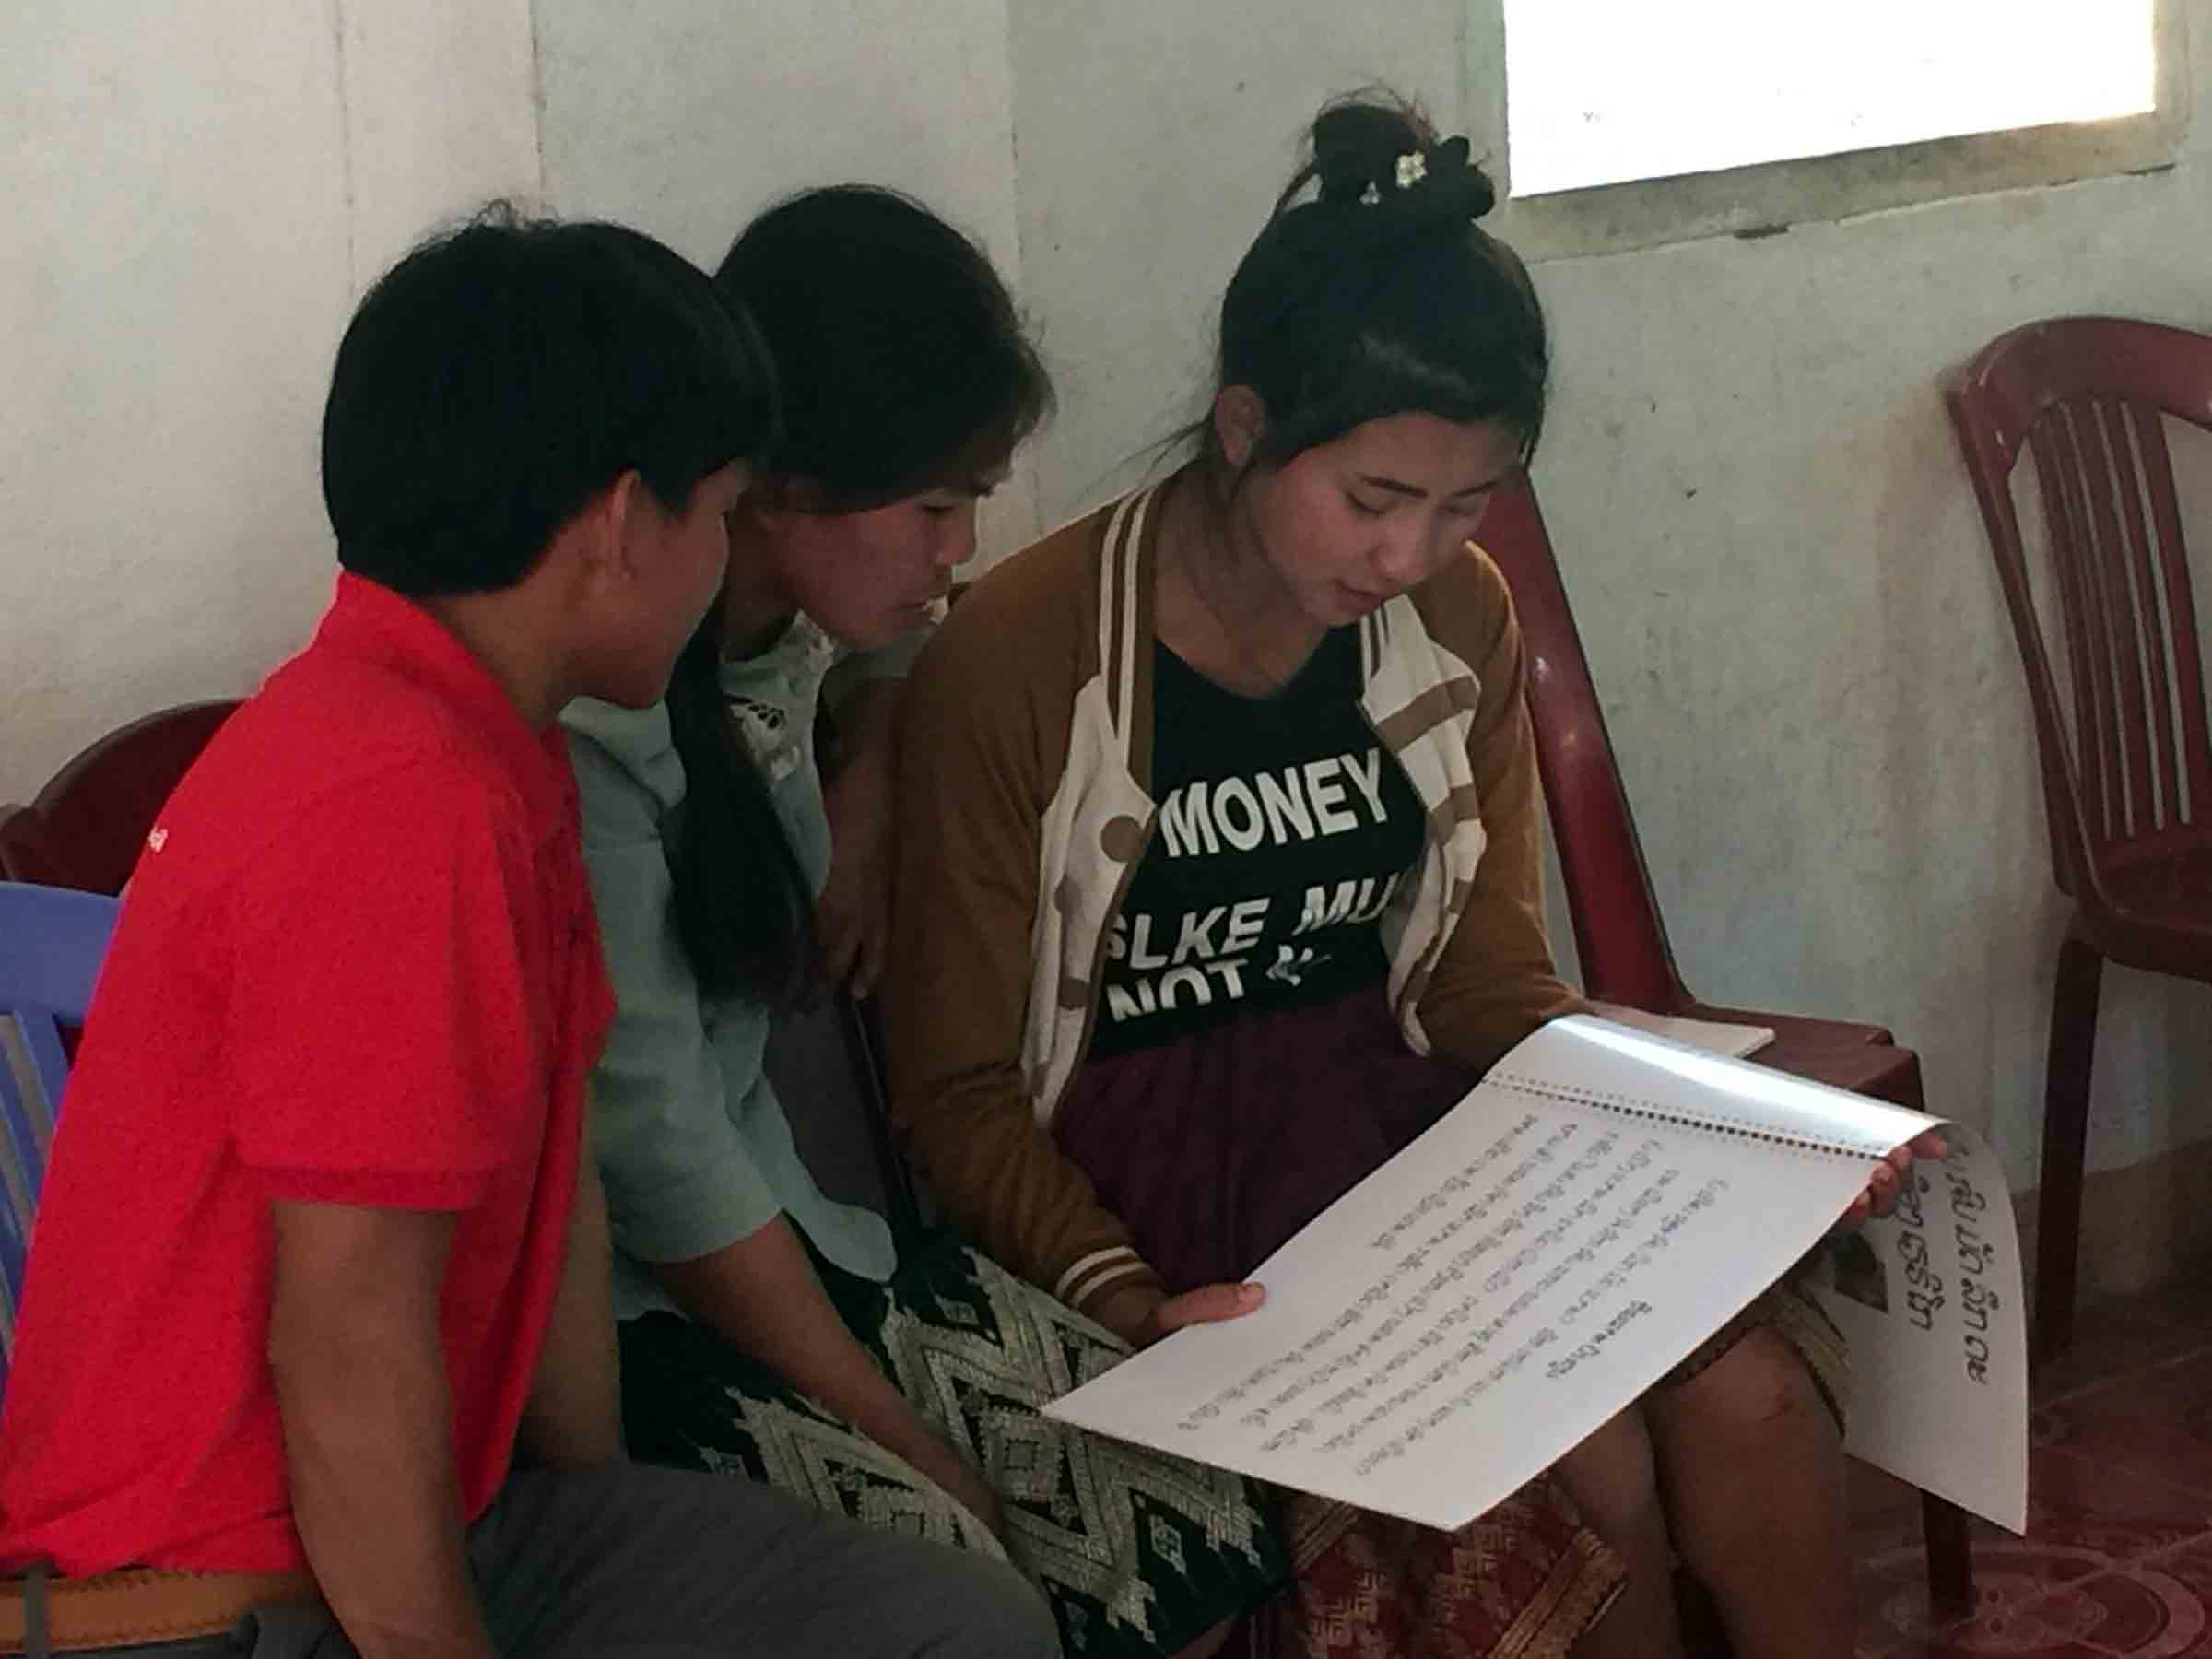 A young Sunday school teacher cannot attend college now because she chose to teach children about Jesus.